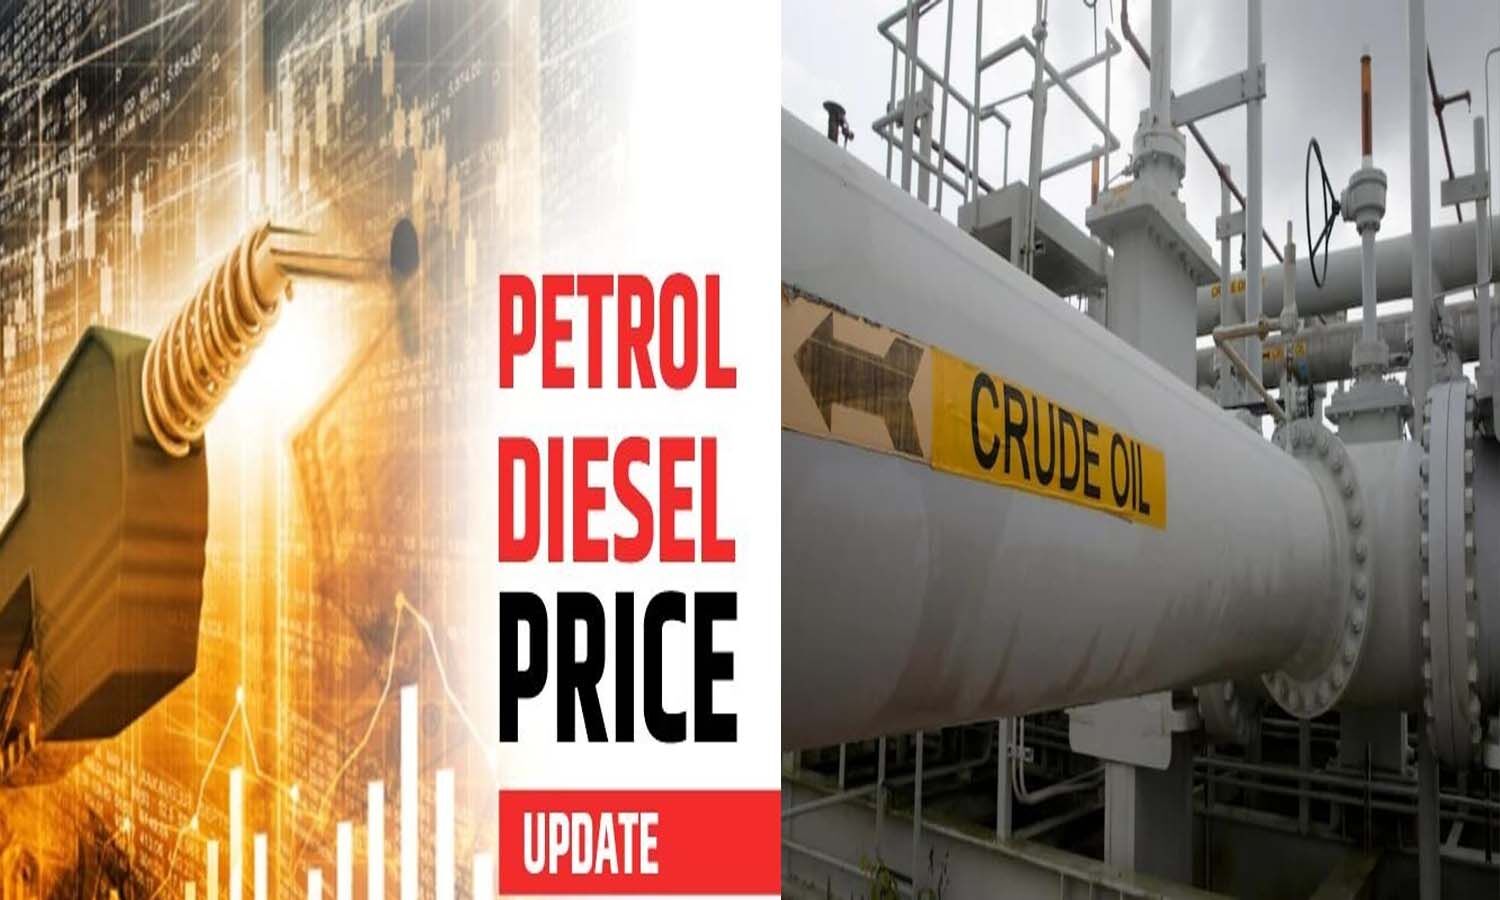 Petrol-Diesel Price Today: How much was the price of petrol-diesel today, see here the latest new rate of your city